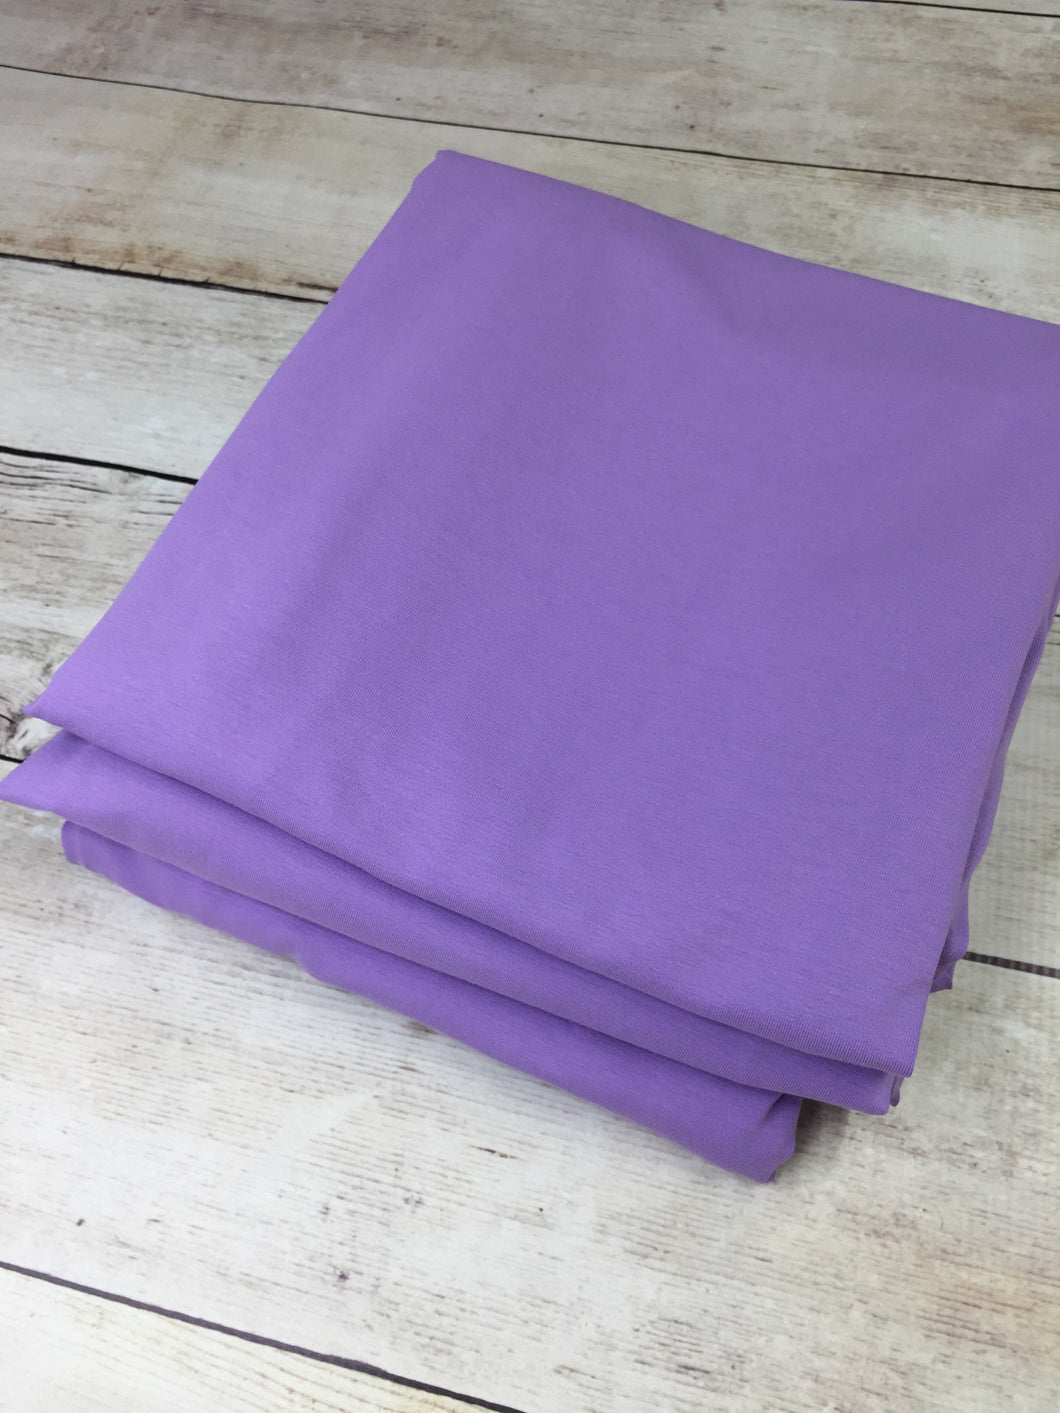 Lavender 12oz Jersey Luxe Solid